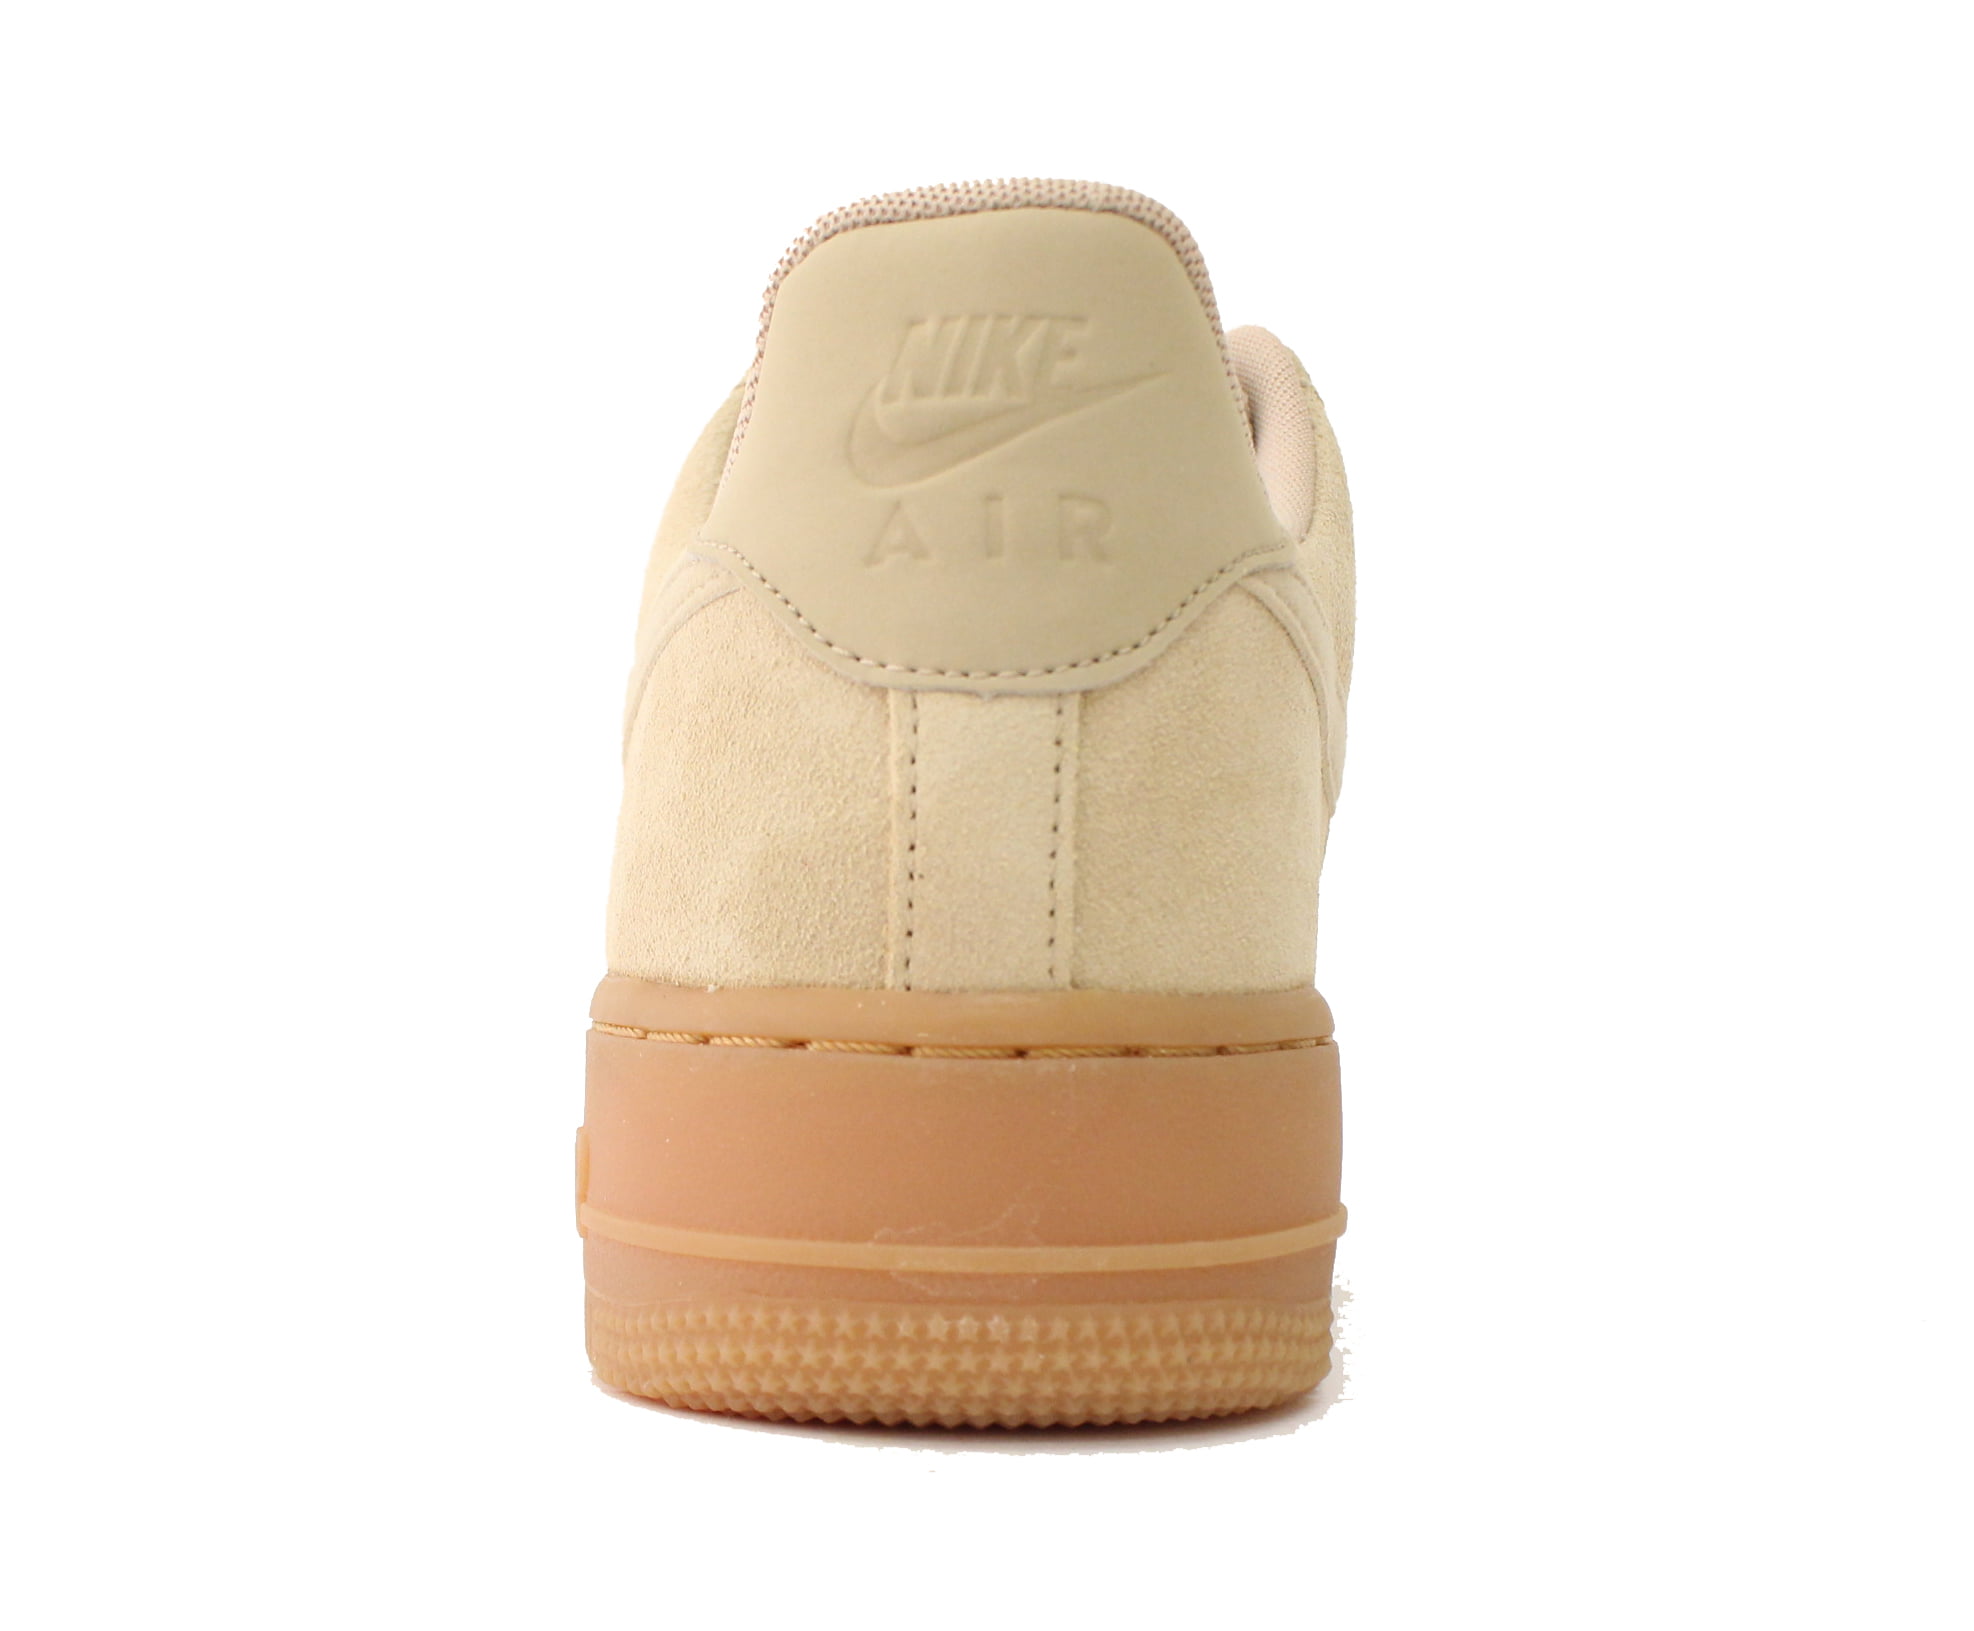 Nike Air Force 1 '07 LV8 Suede Mushroom Sneakers Shoes Size 7.5  AA1117-200